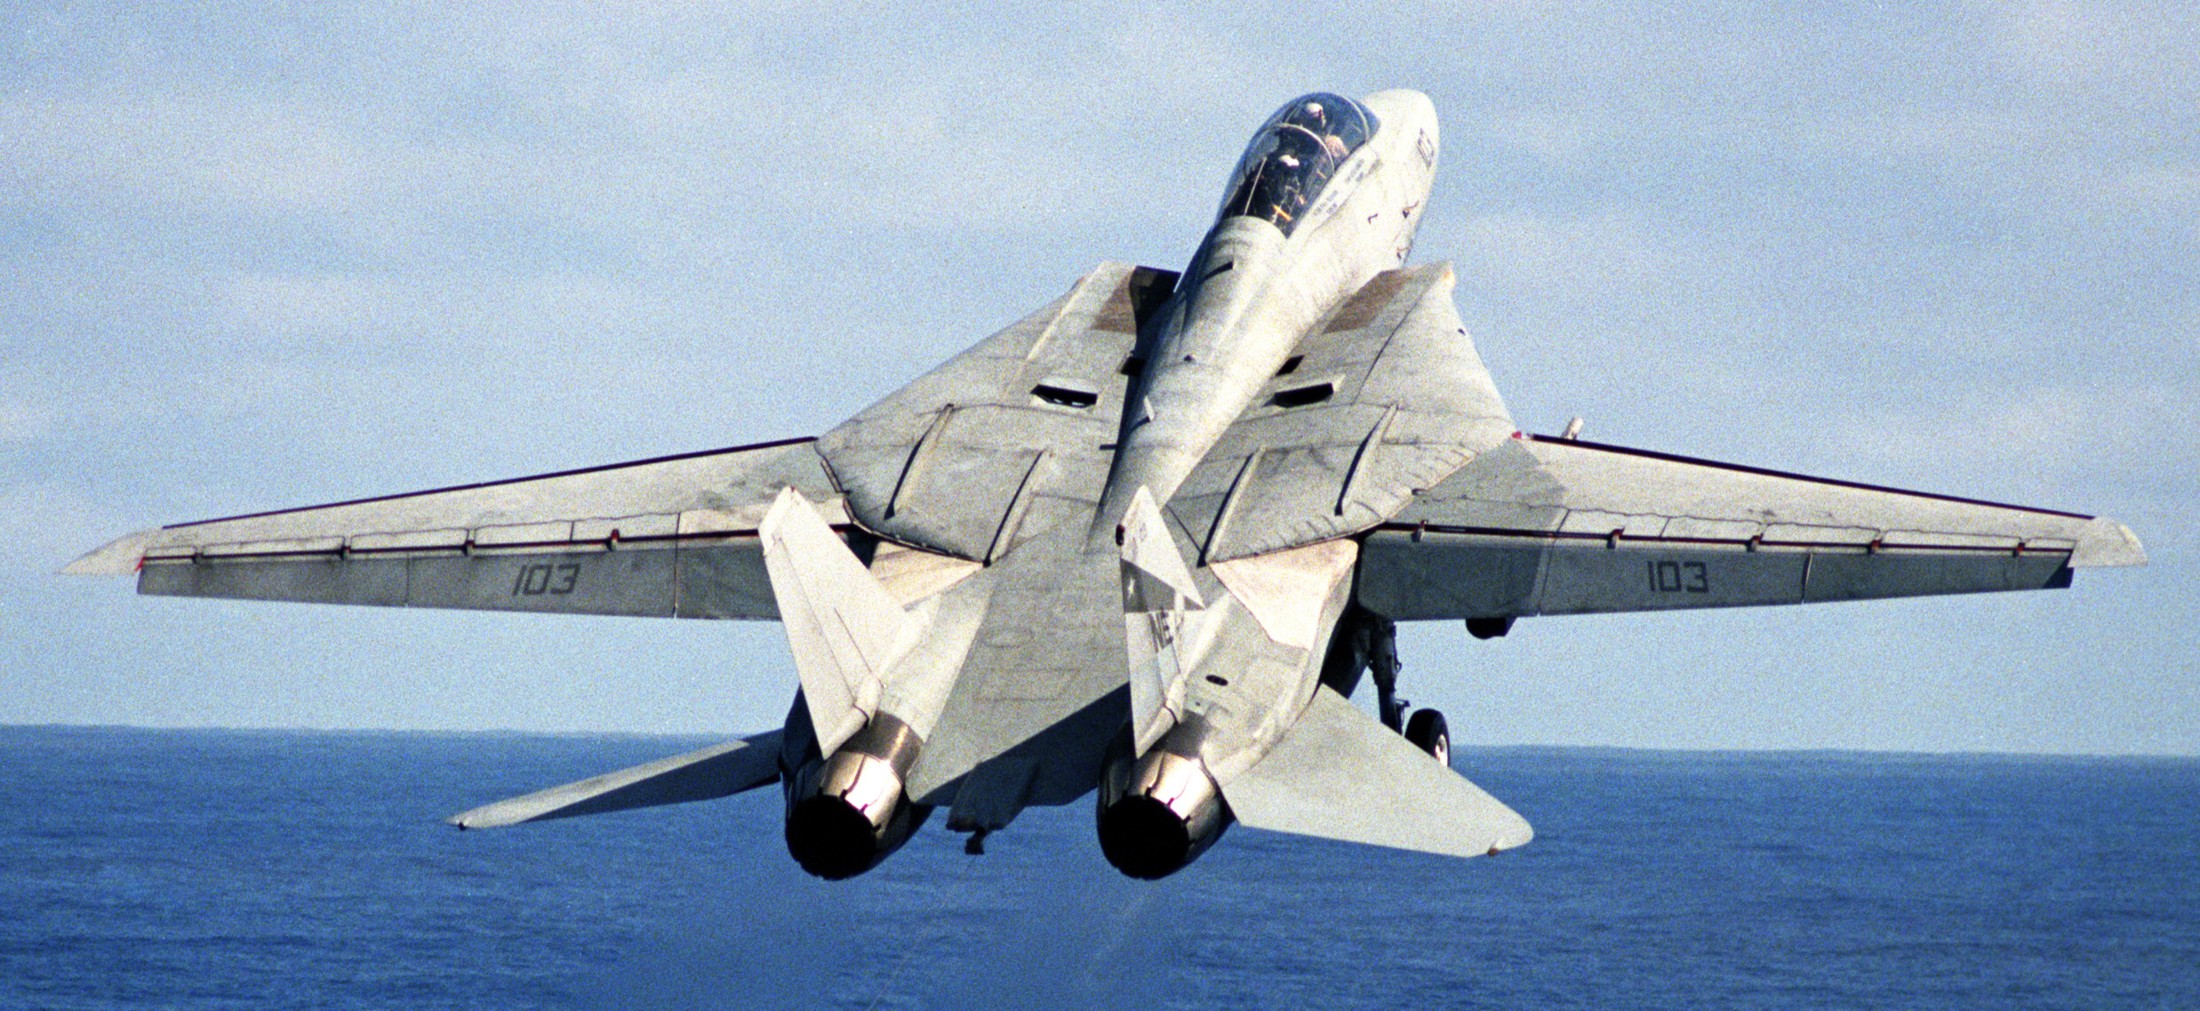 vf-2 bounty hunters fighter squadron fitron f-14d tomcat carrier air wing cvw-2 uss constellation cv-64 29